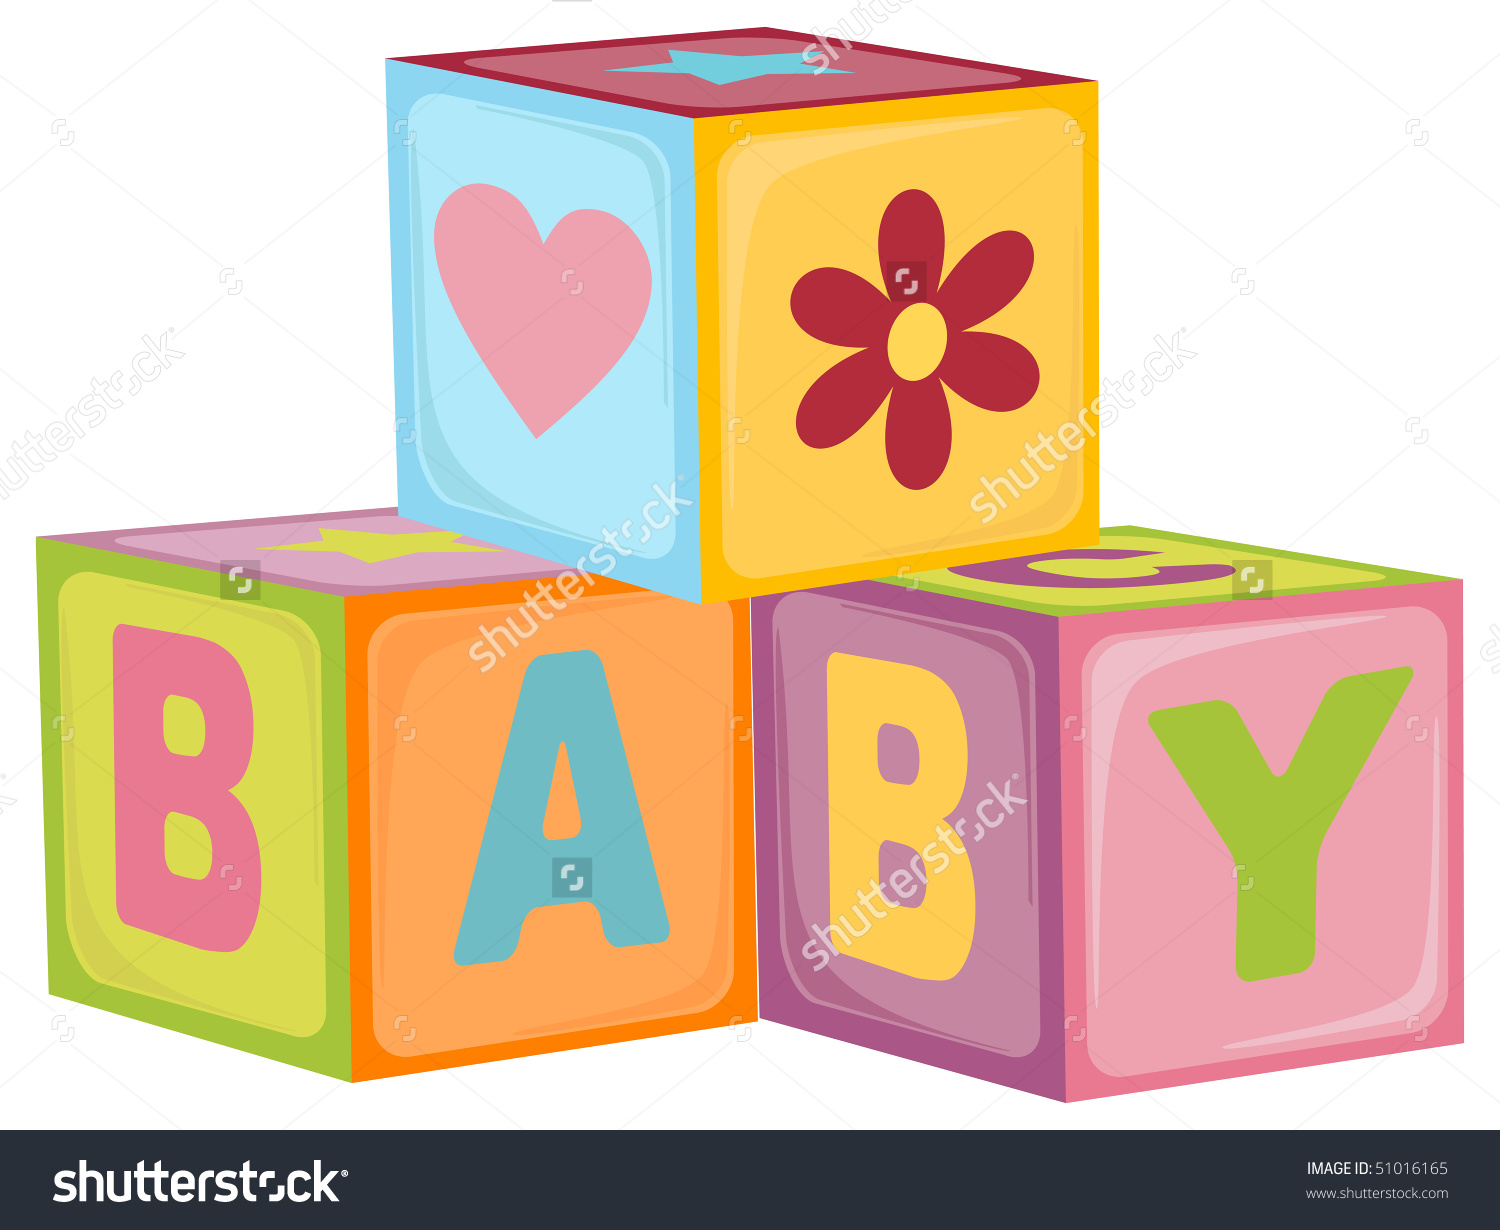 dice clipart baby